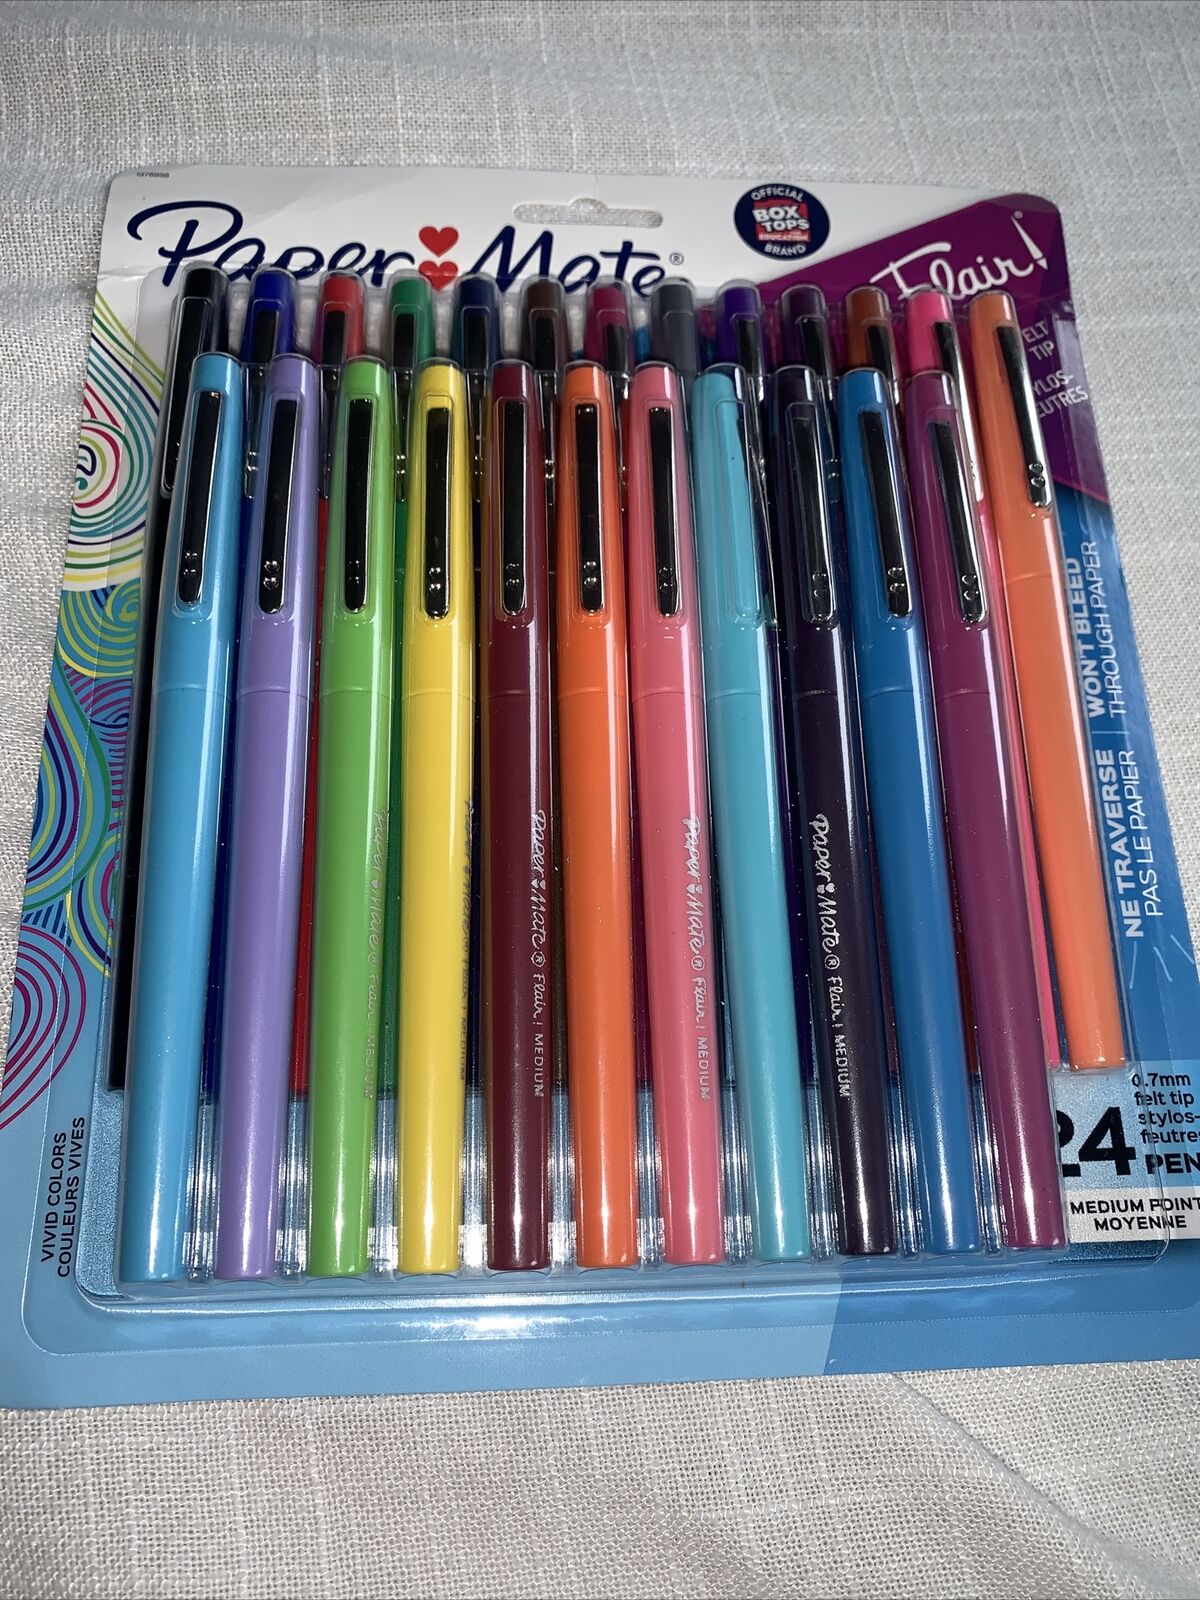 PAPERMATE FLAIR MED. 24 CT 1978998